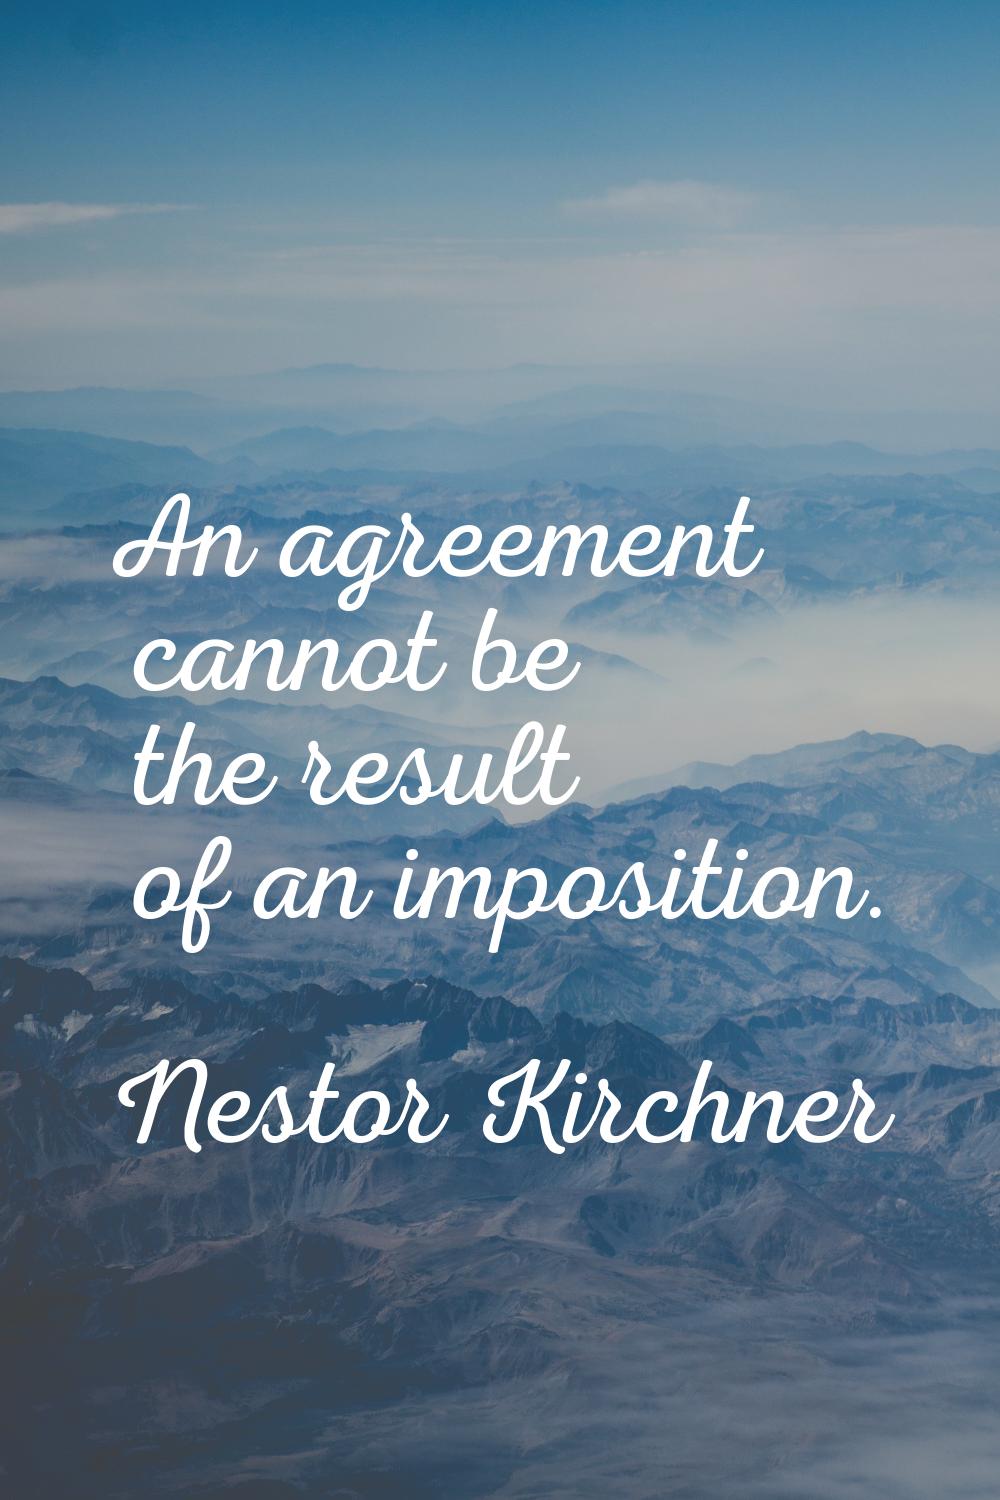 An agreement cannot be the result of an imposition.